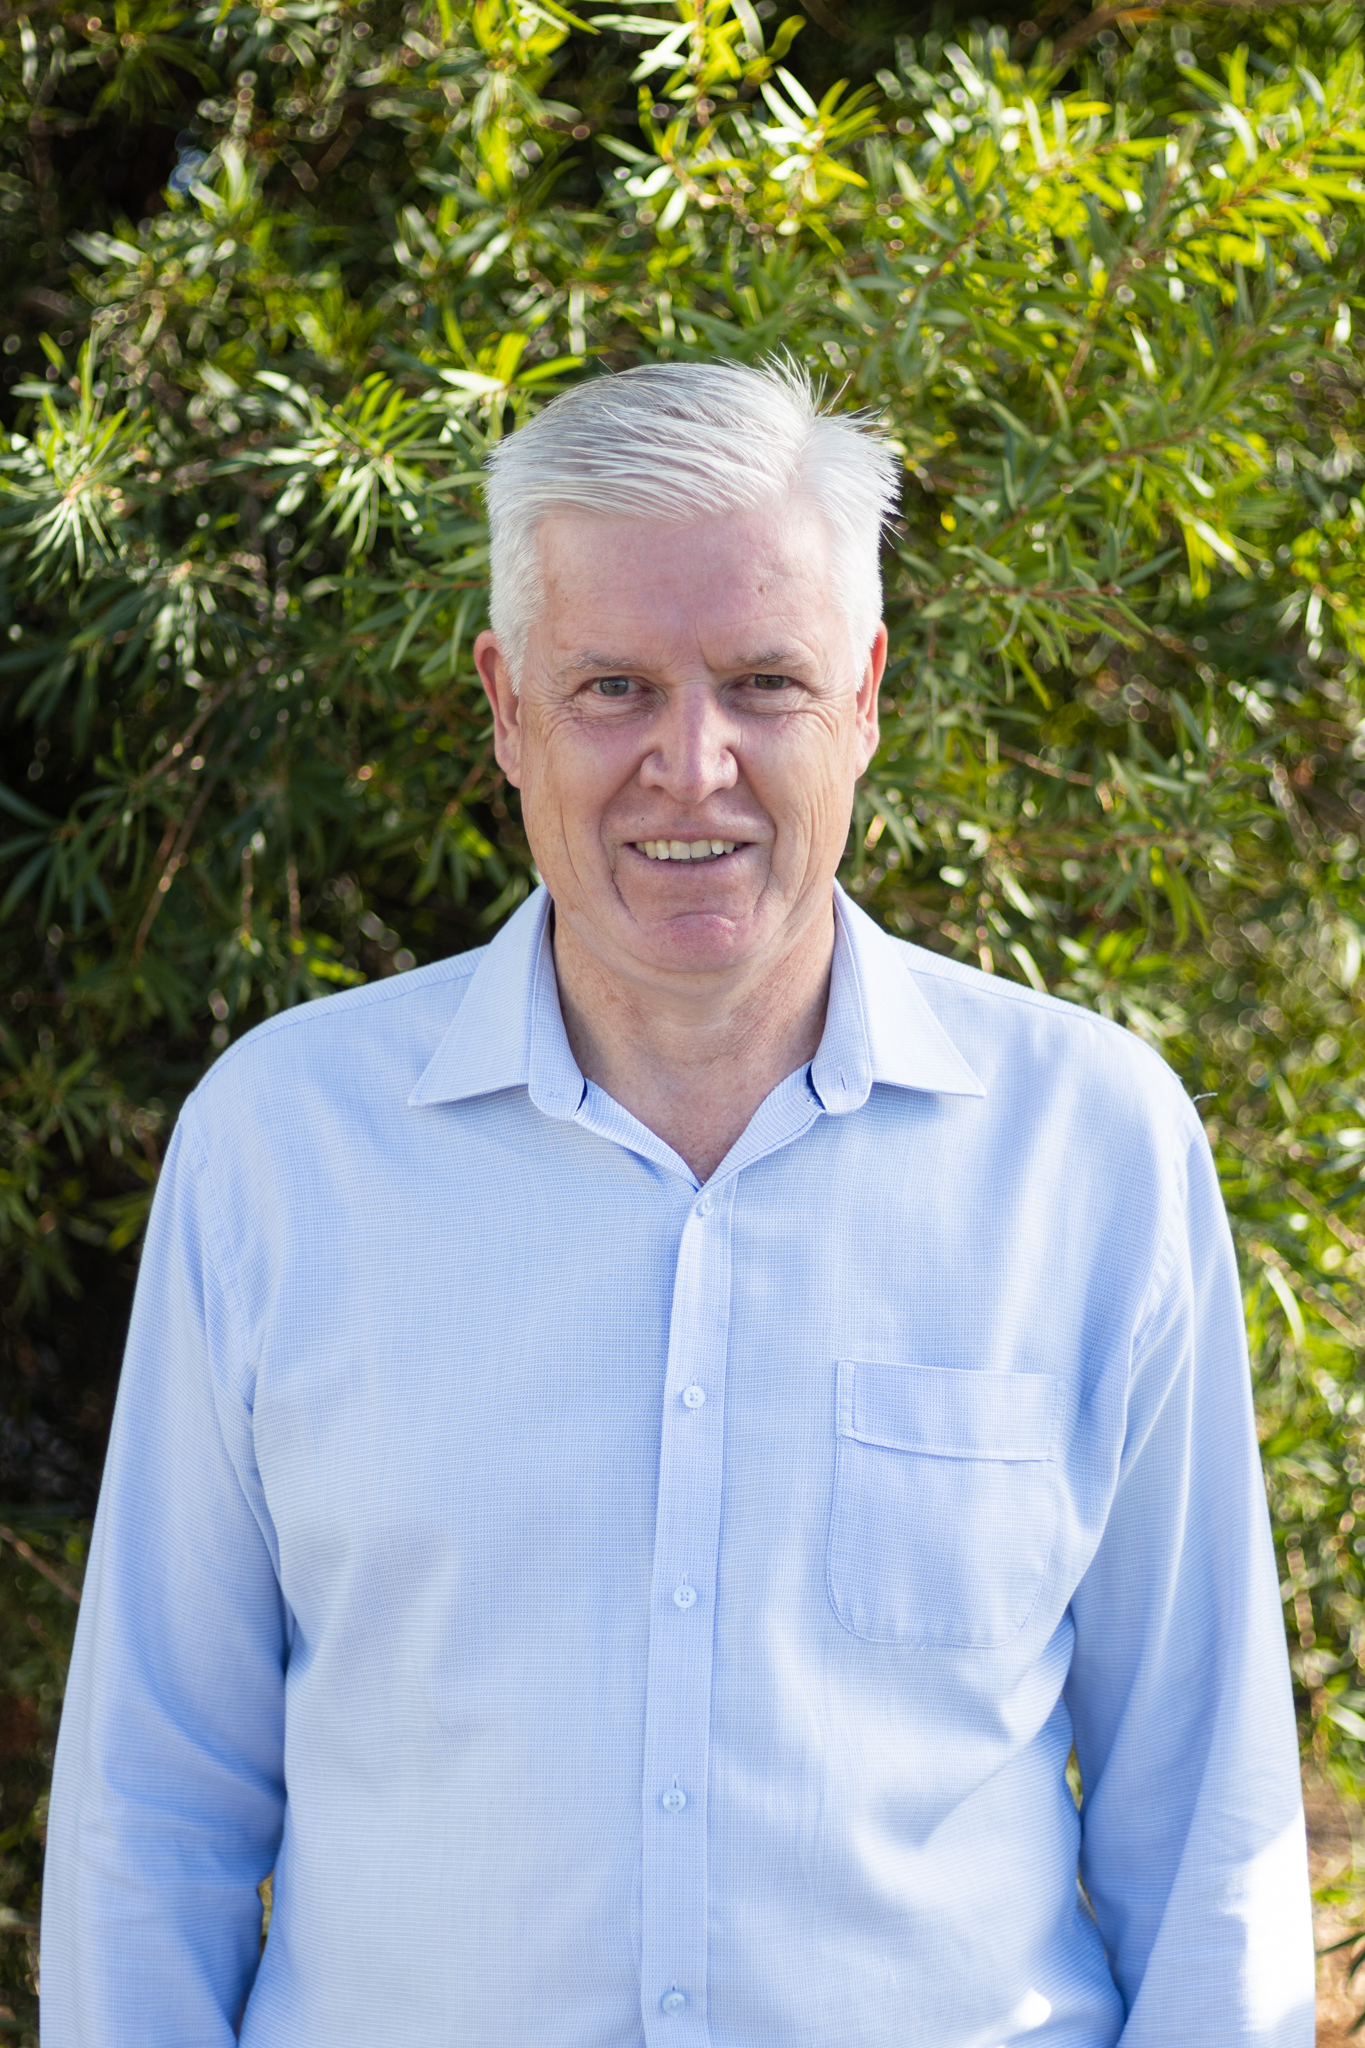 Andrew Corbett - Executive team member and General Manager People, Culture and Safety for Challenge Community Services. Andrew is standing in front of some greenery wearing a light blue business shirt.